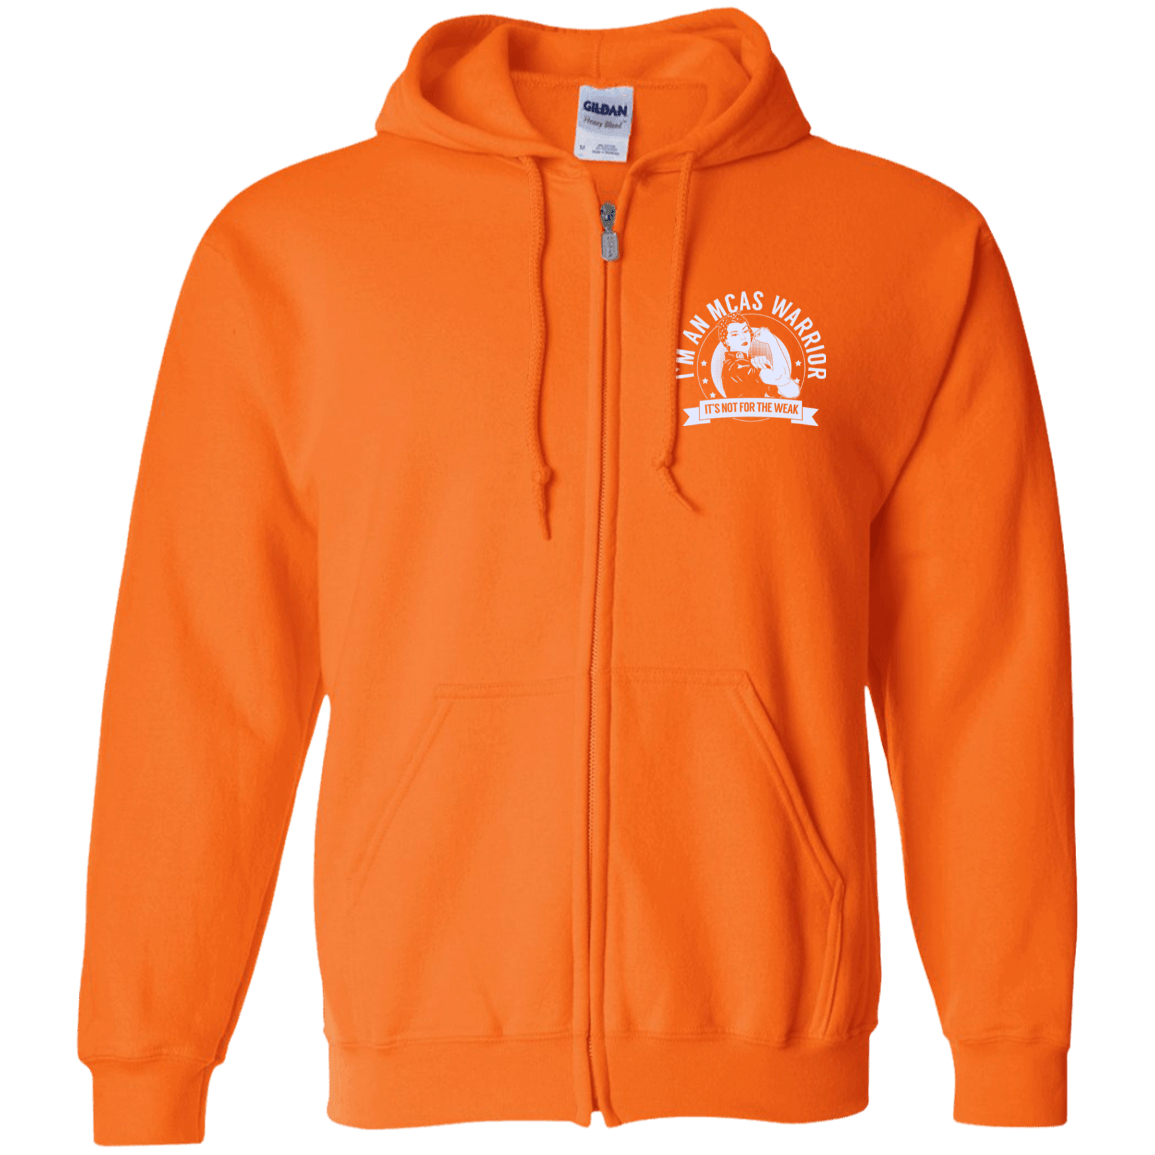 Mast Cell Activation Syndrome - MCAS Warrior NFTW Zip Up Hooded Sweatshirt - The Unchargeables